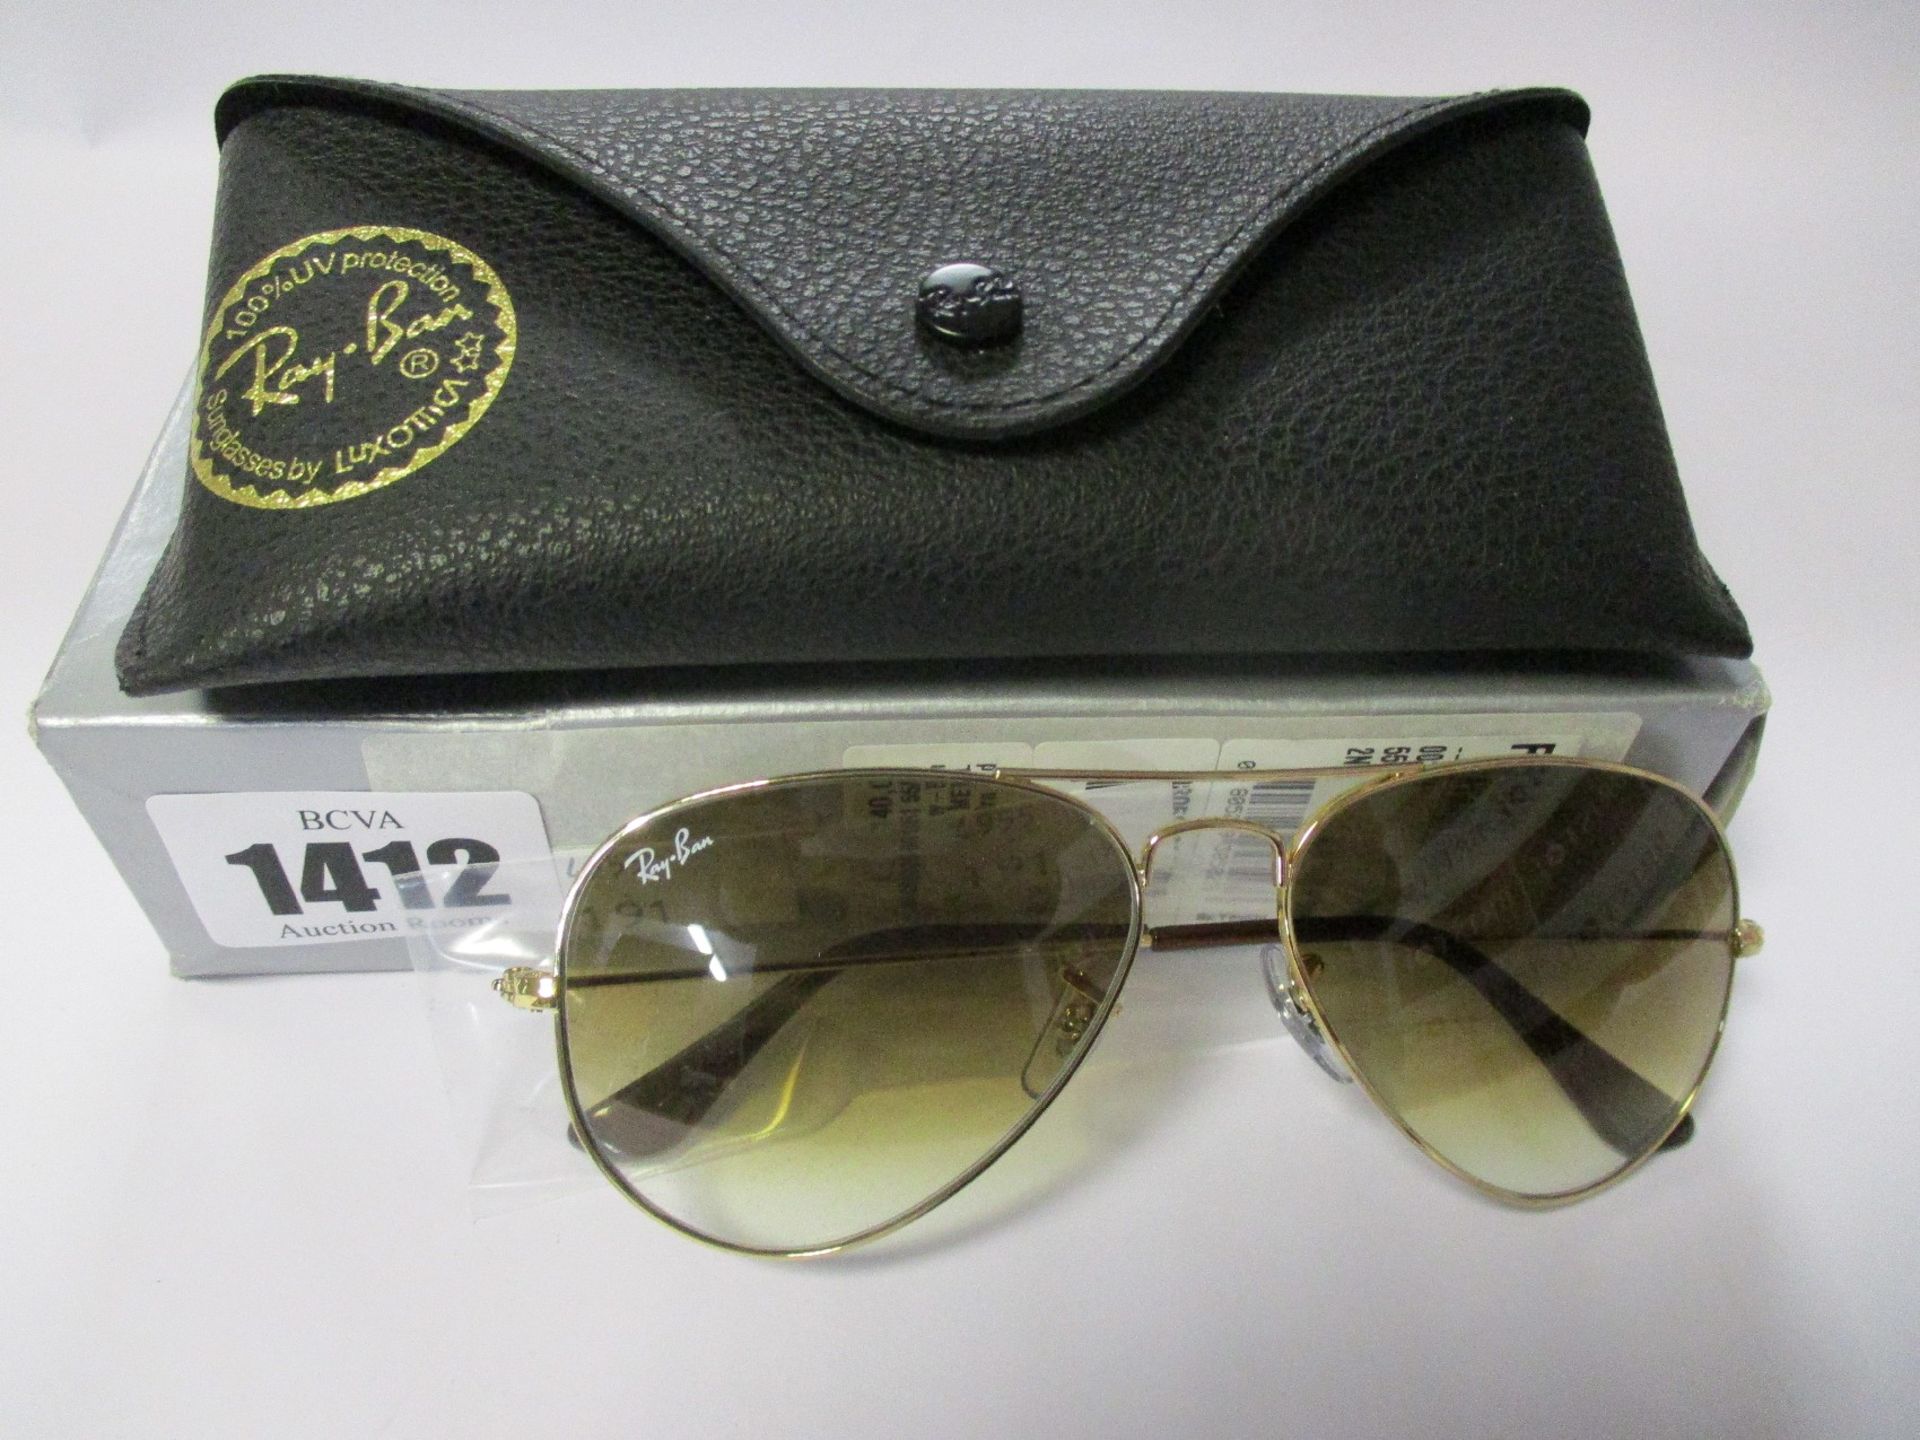 A pair of as new Ray Ban Aviator large metal sunglasses.